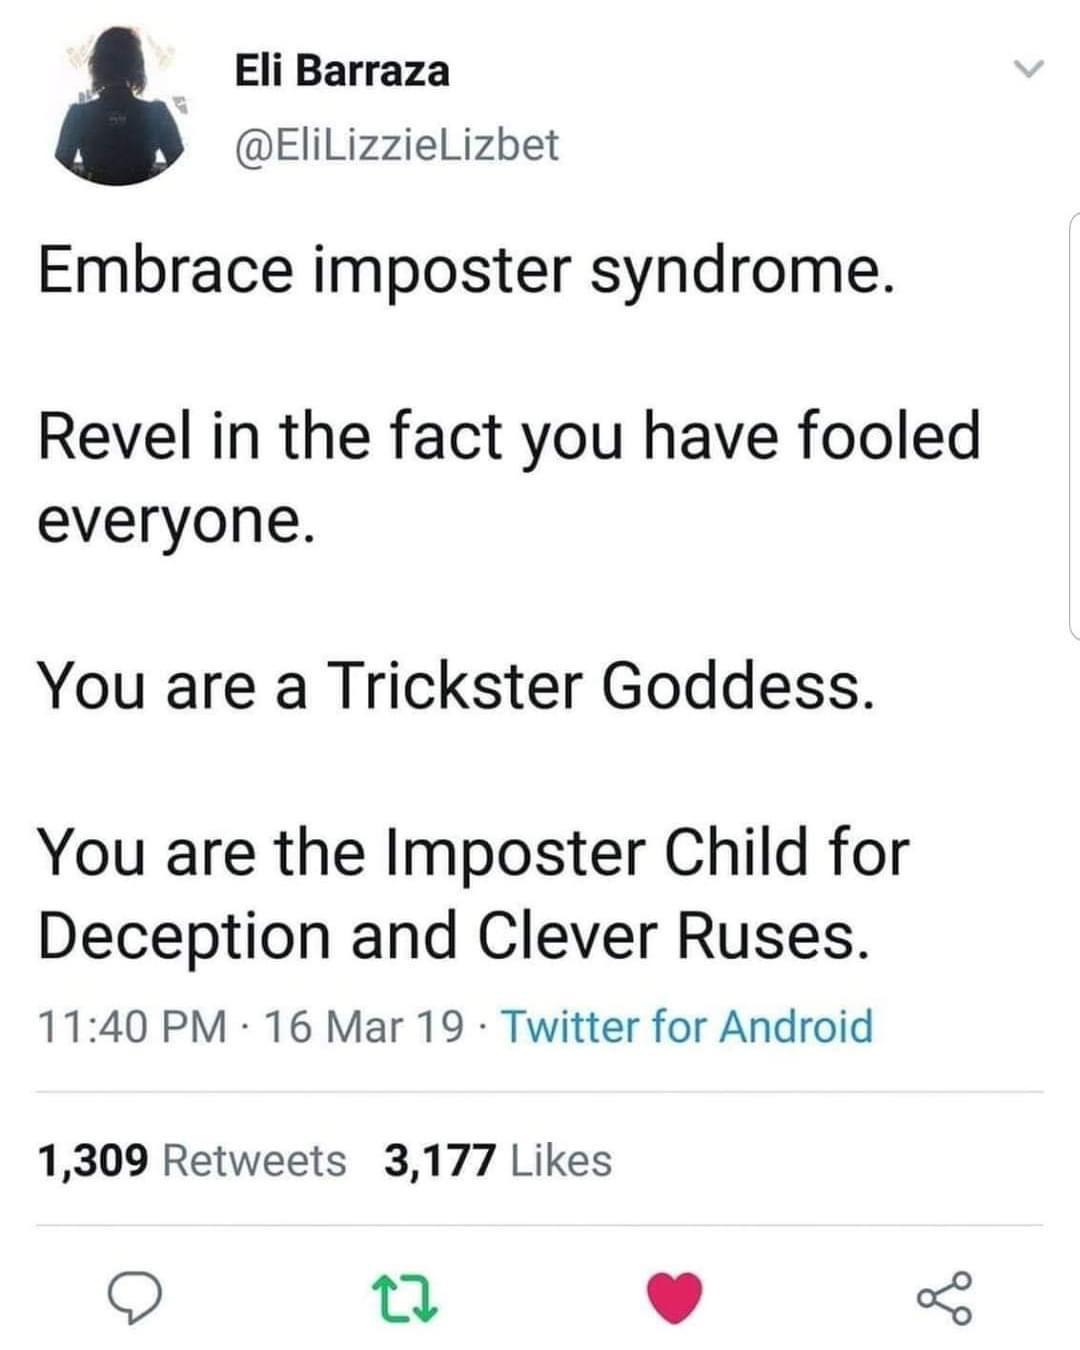 A much better take on imposter syndrome